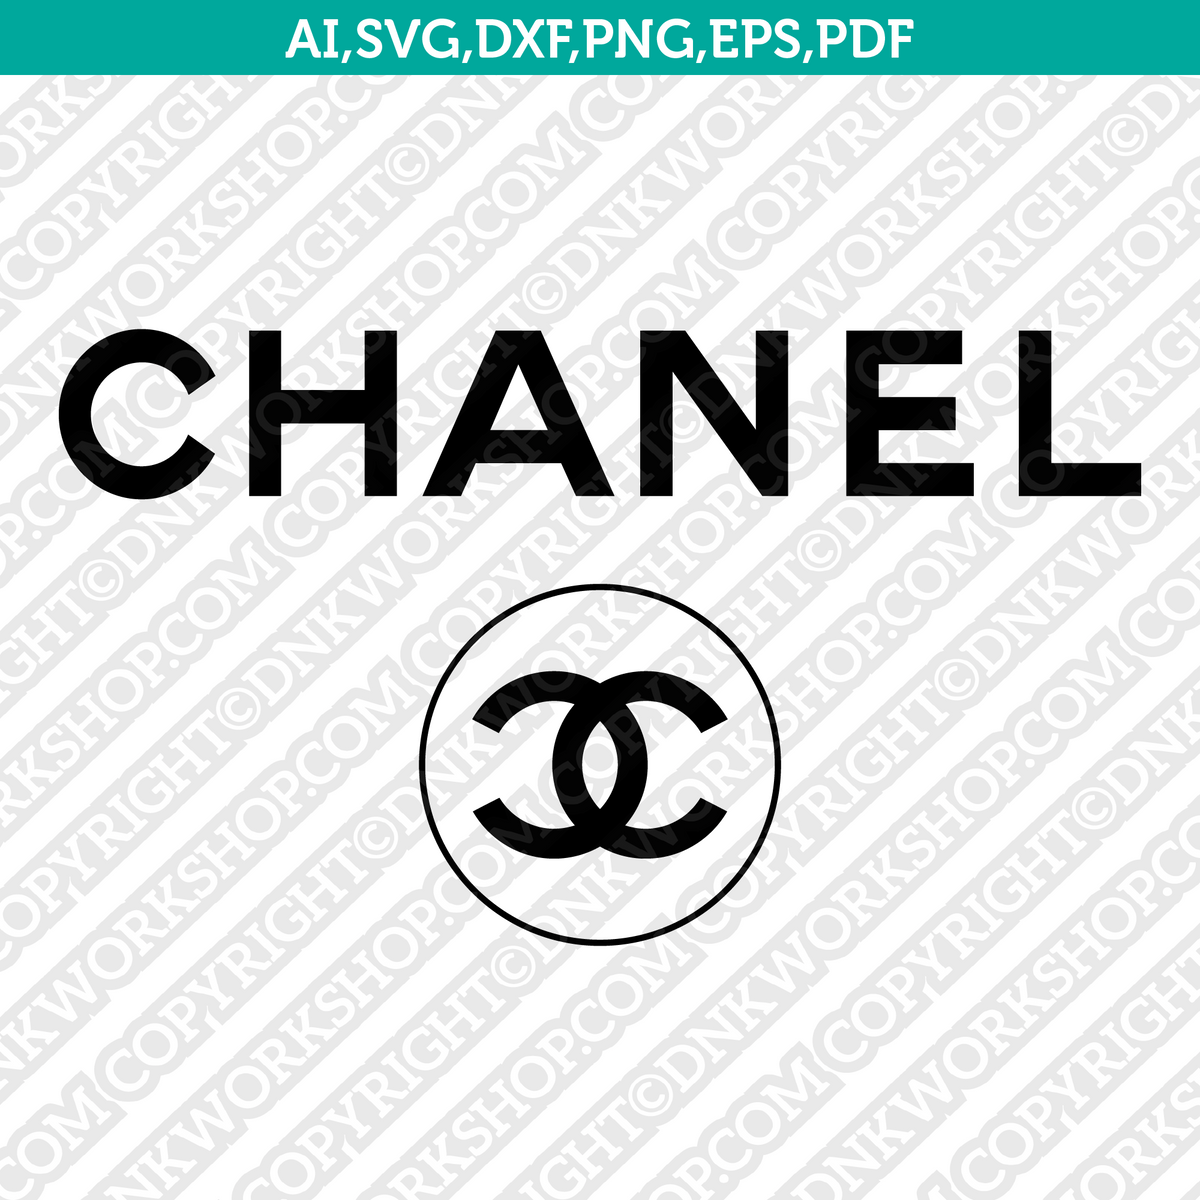 Chanel Logo SVG Cut File Cricut Clipart Dxf Eps Png Silhouette Cameo ...